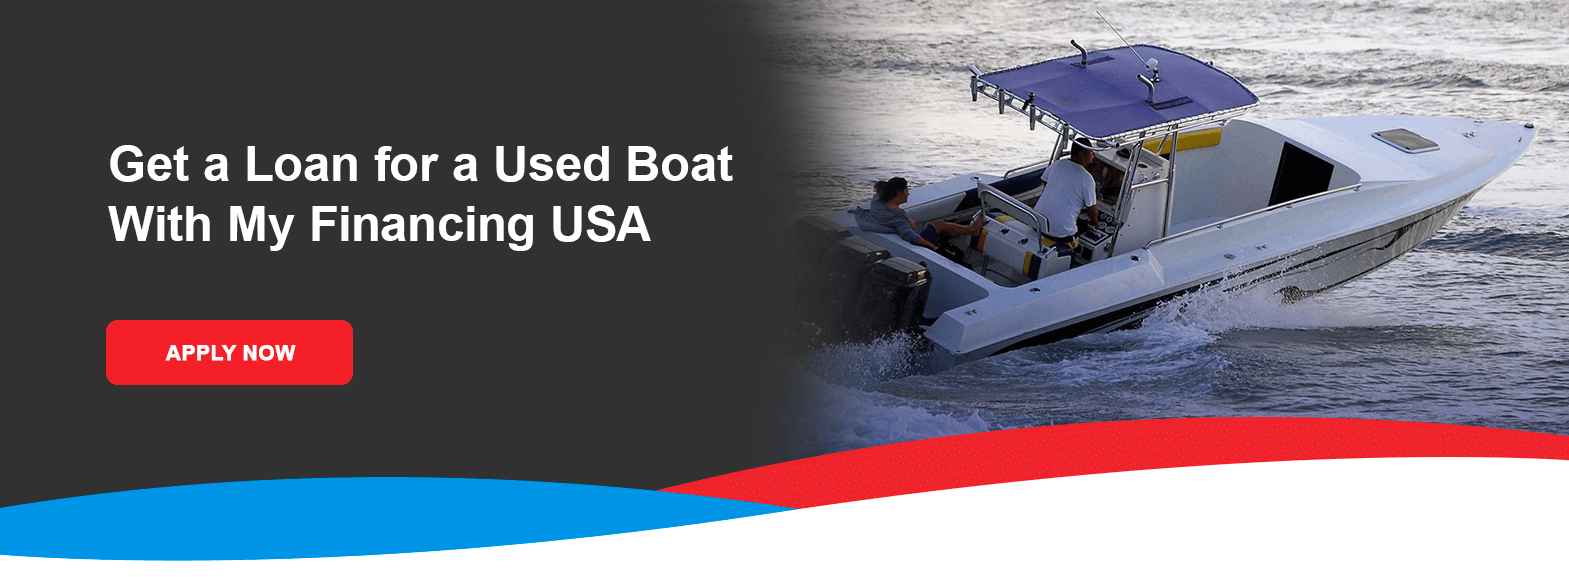 Get a Loan for a Used Boat With My Financing USA. Apply now!